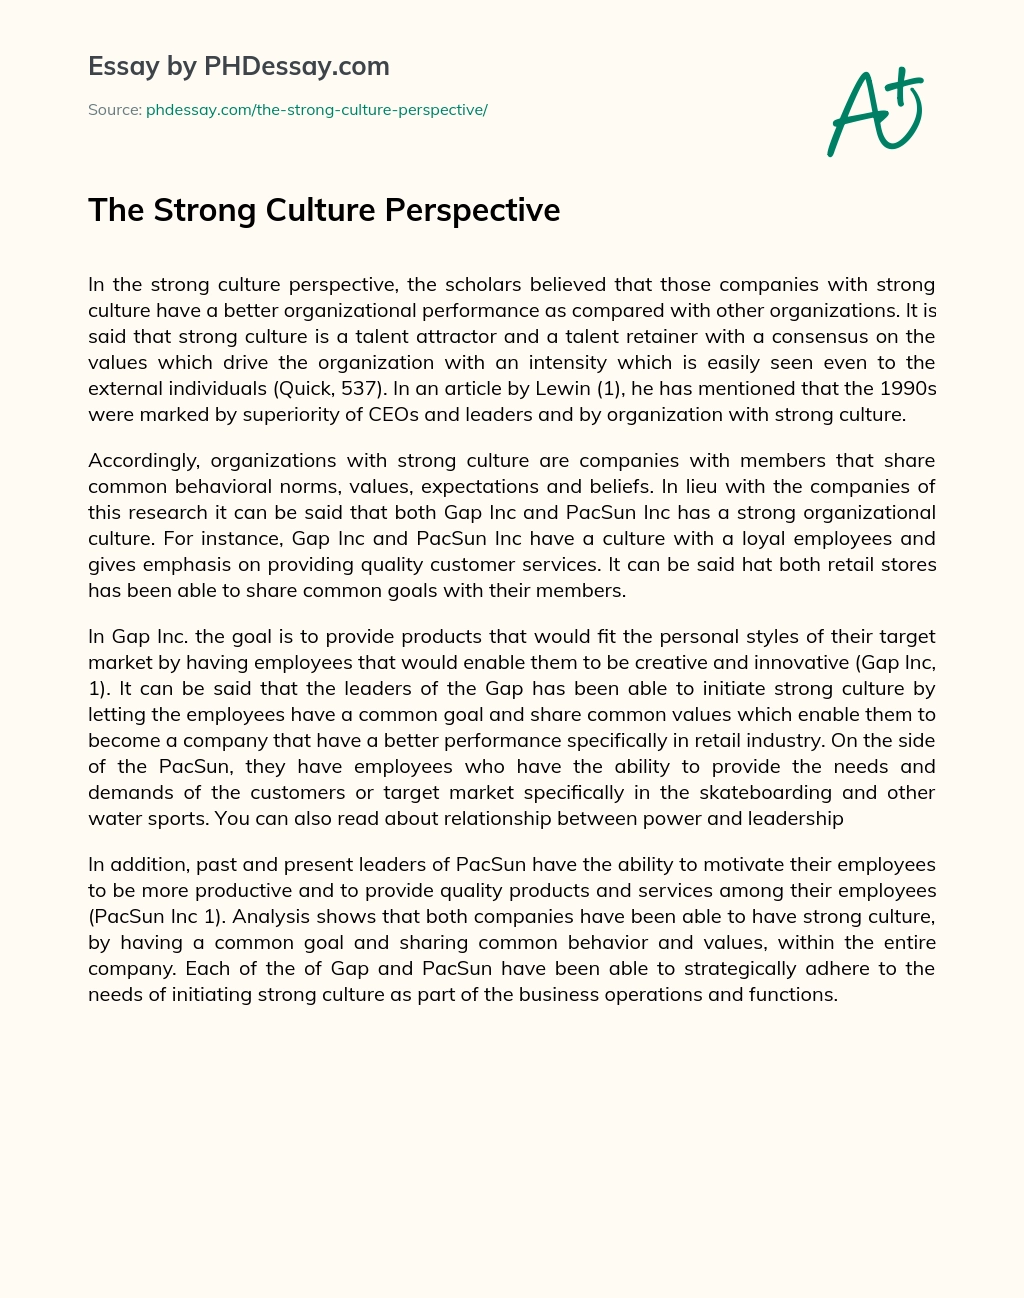 The Strong Culture Perspective essay